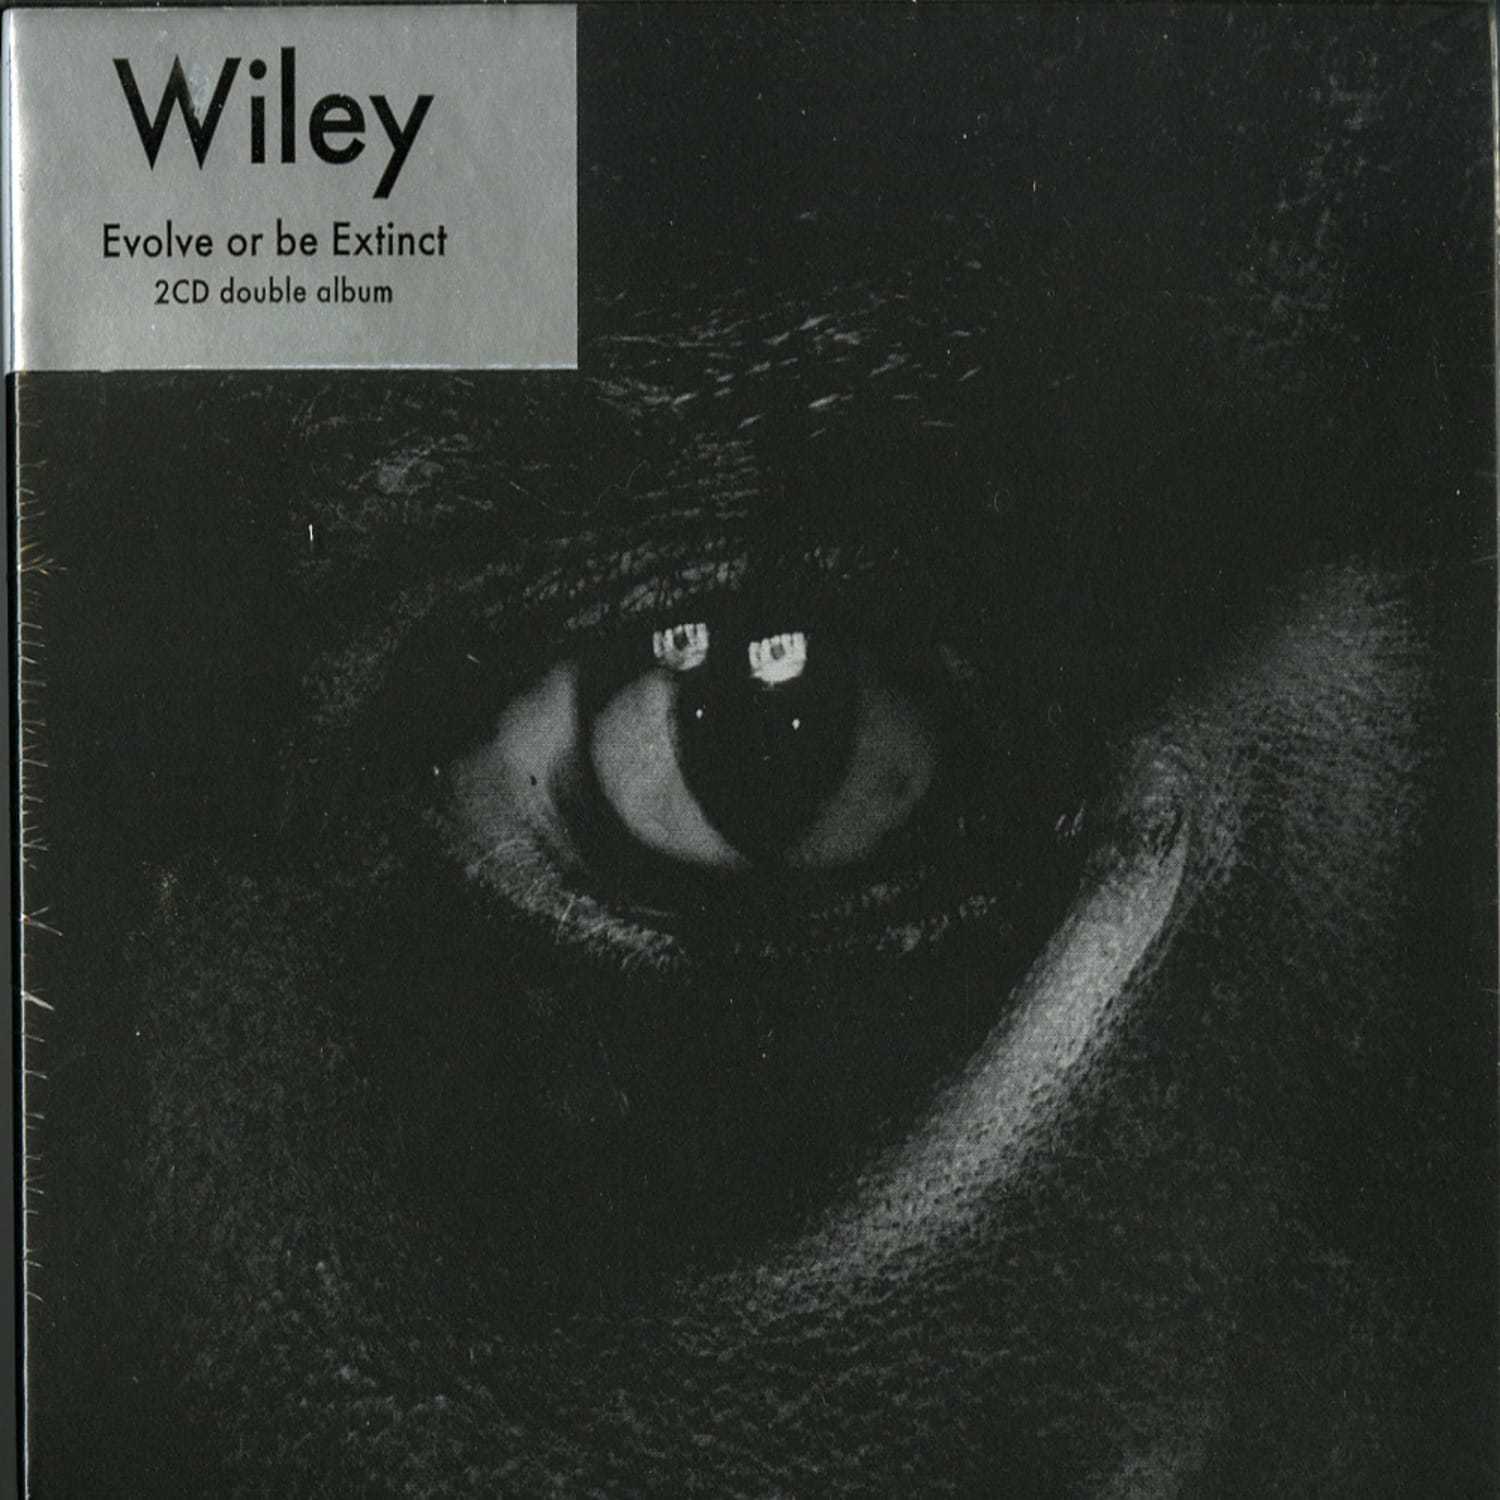 Wiley - EVOLVE OR BE EXTINCT 